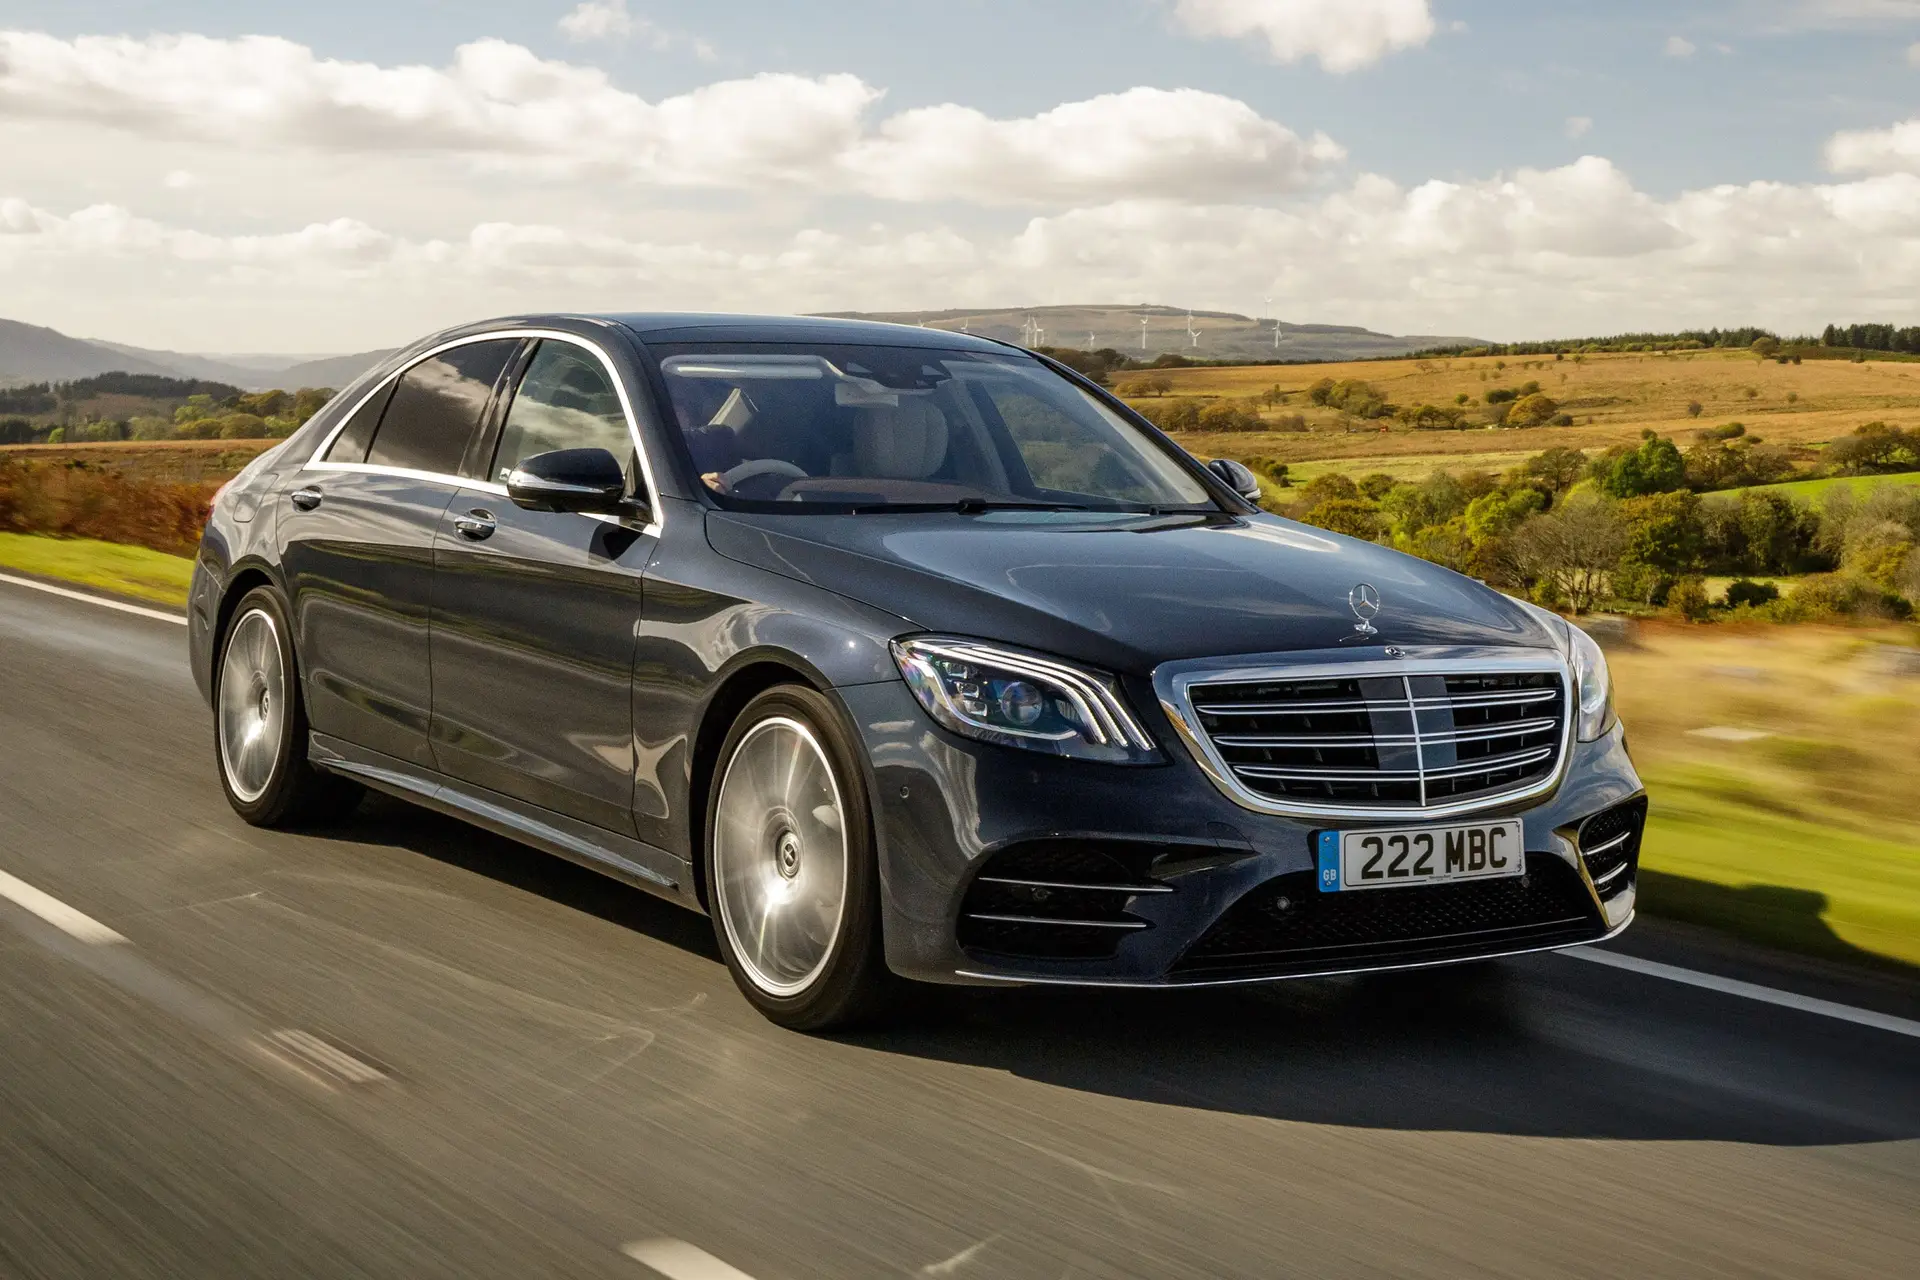 Used Mercedes-Benz S-Class (2014-2020) Review frontright exterior